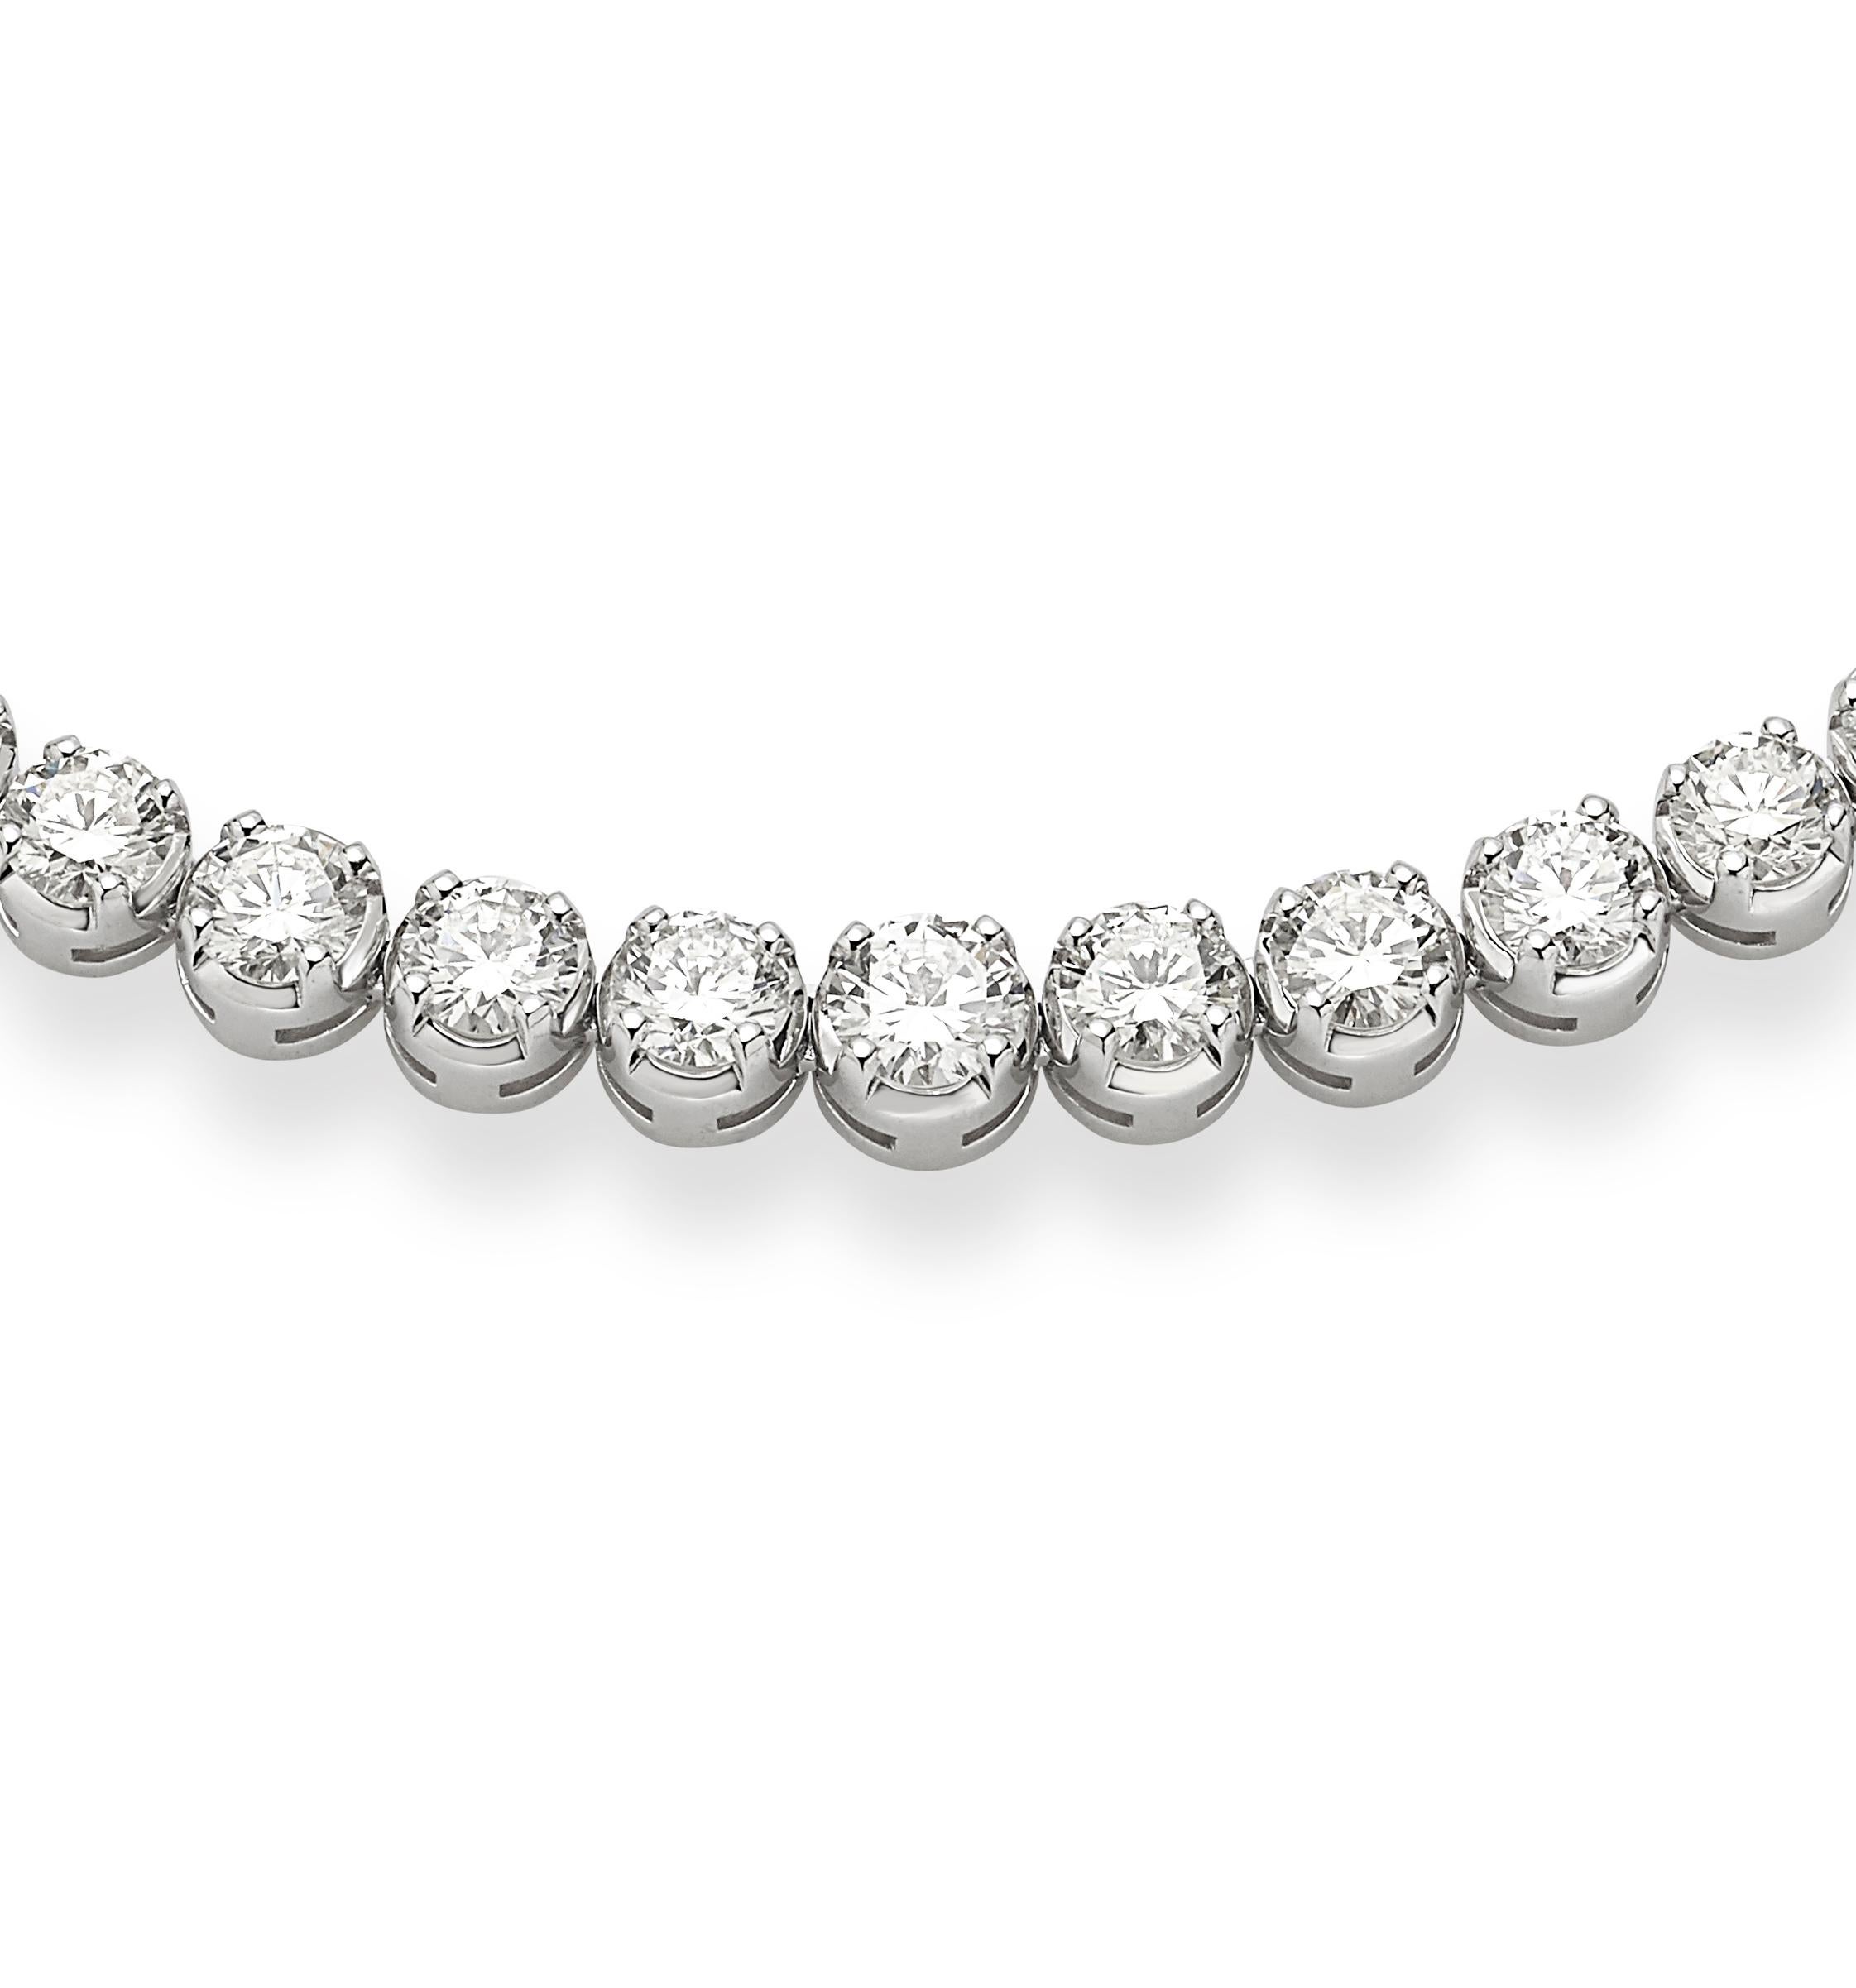 18 Karat White Gold Garavelli Diamond Tennis Necklace:
This gorgeous necklace is hand-made in Italy and has been made to celebrate our  company's 100 years anniversary 
It features a beautiful one carat center stone color H clarity VS1. Stone